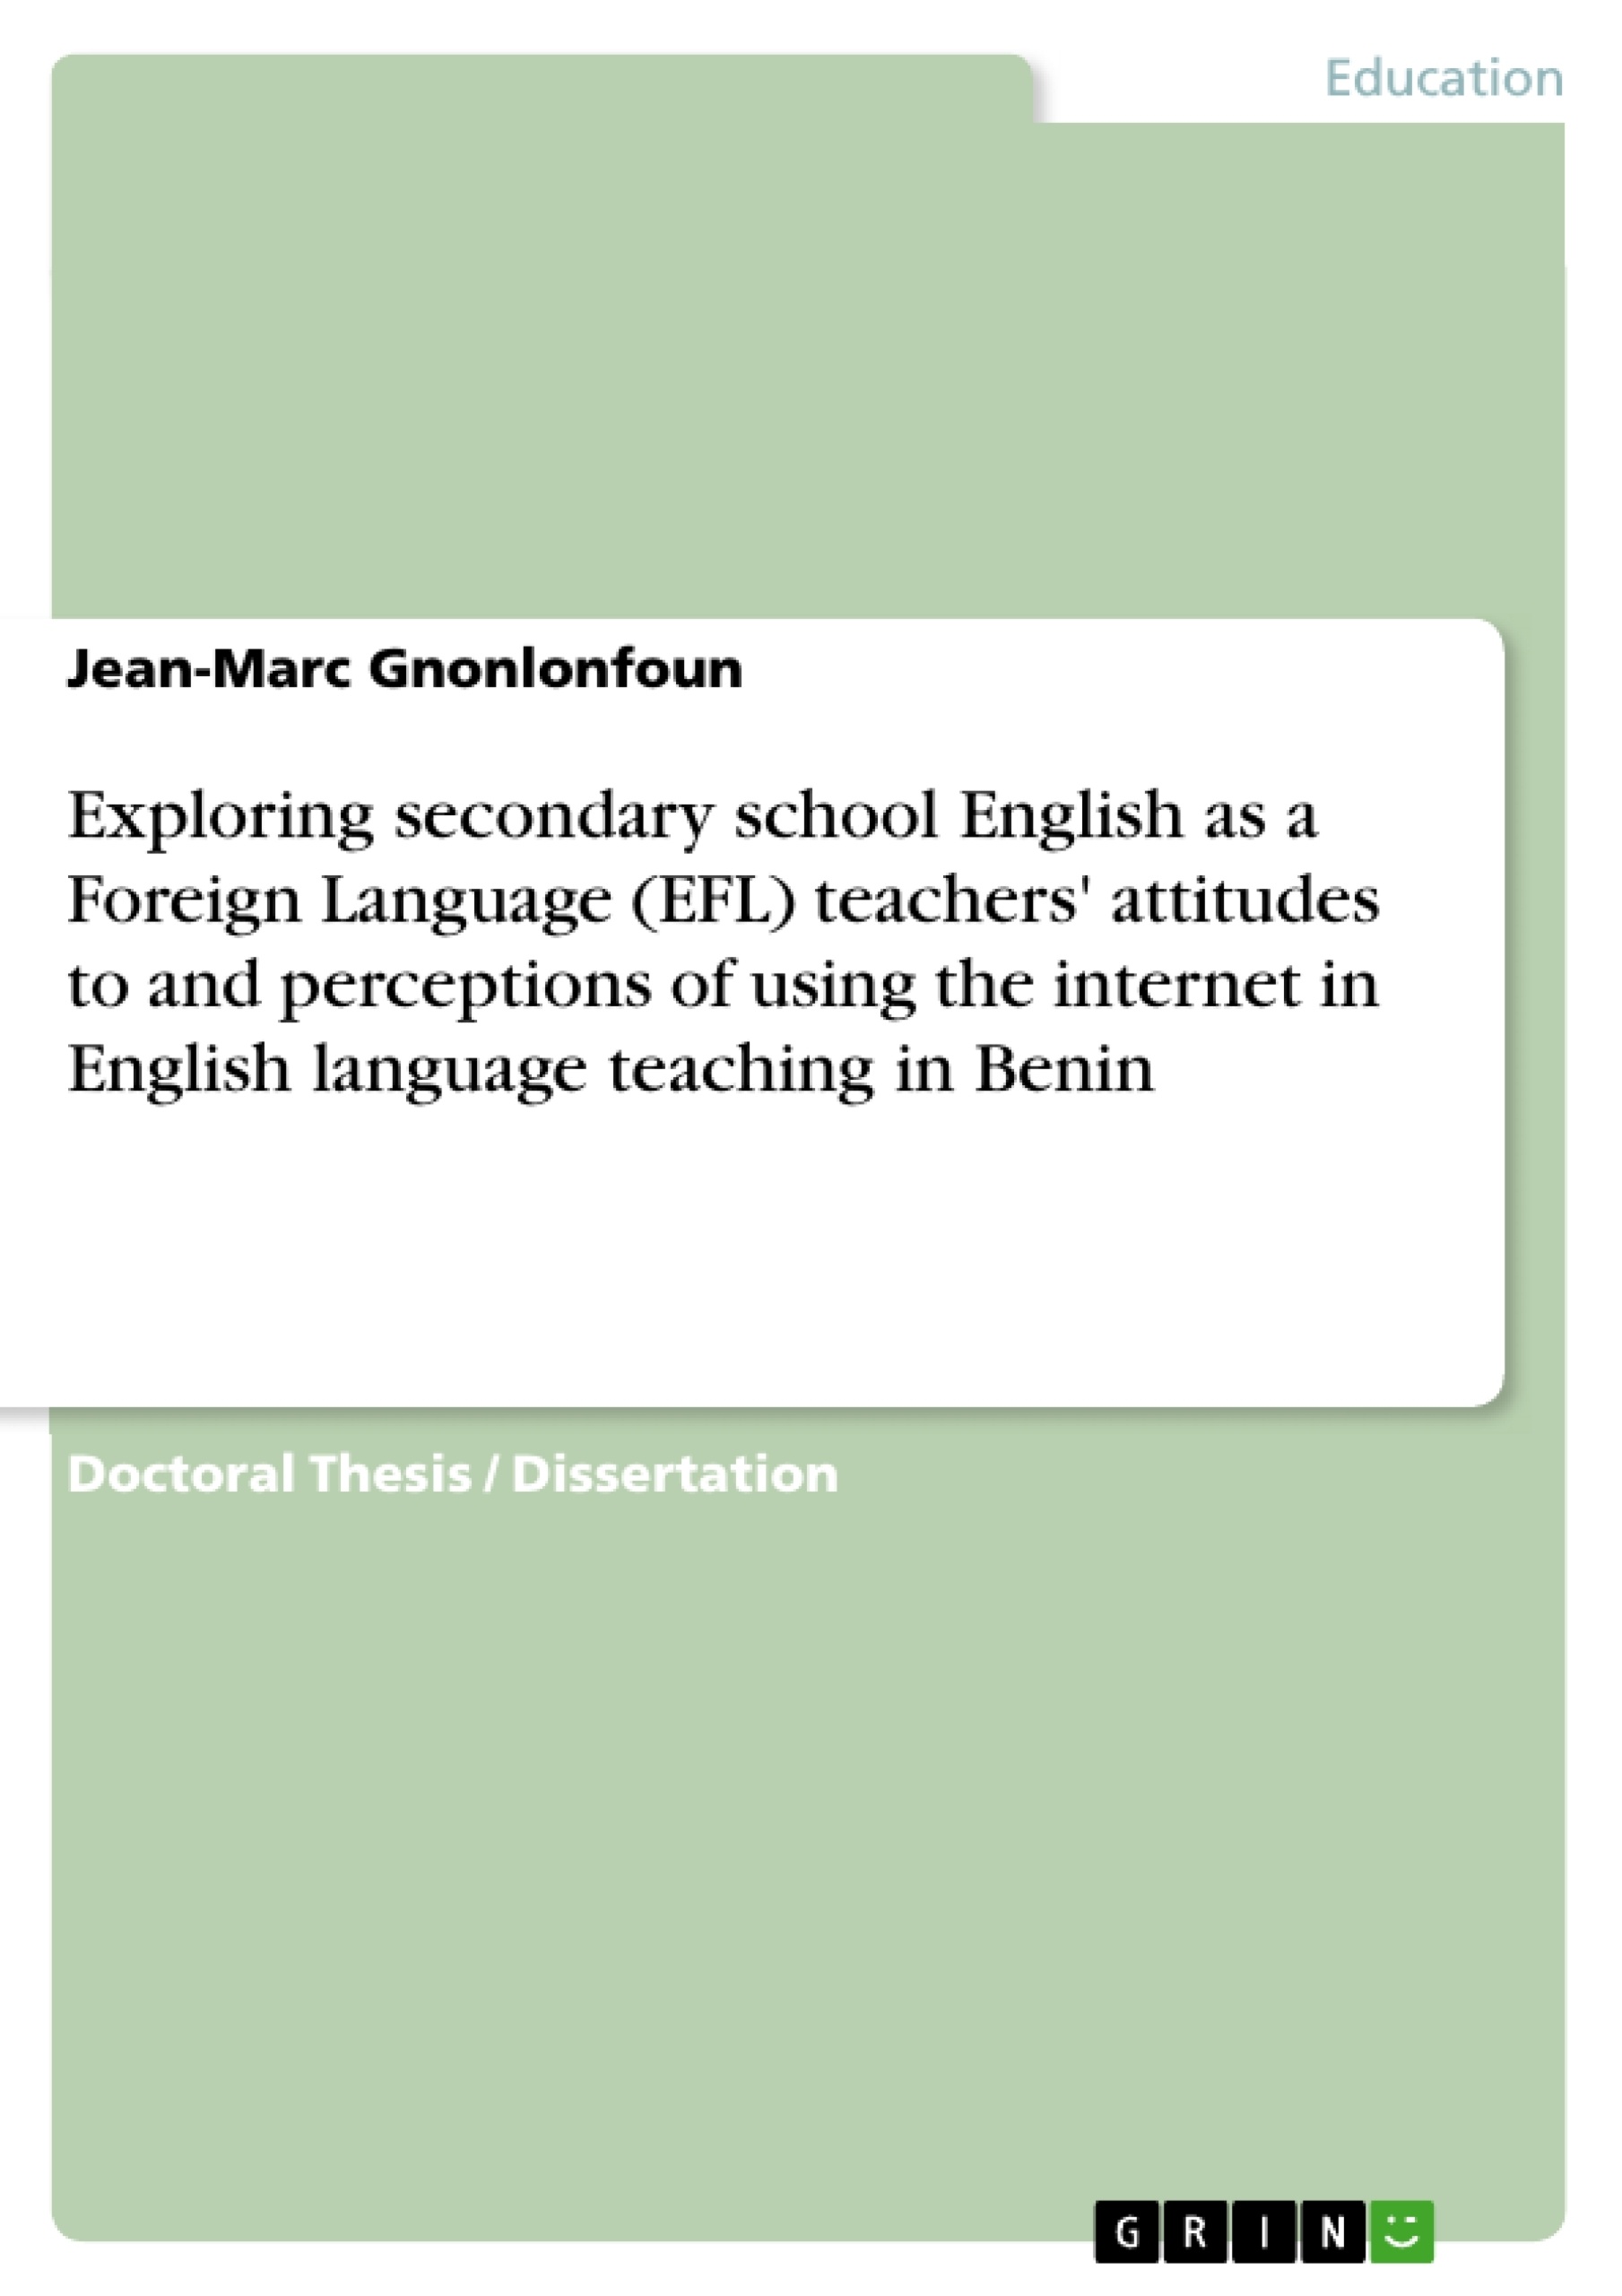 Title: Exploring secondary school English as a Foreign Language (EFL) teachers' attitudes to and perceptions of using the internet in English language teaching in Benin